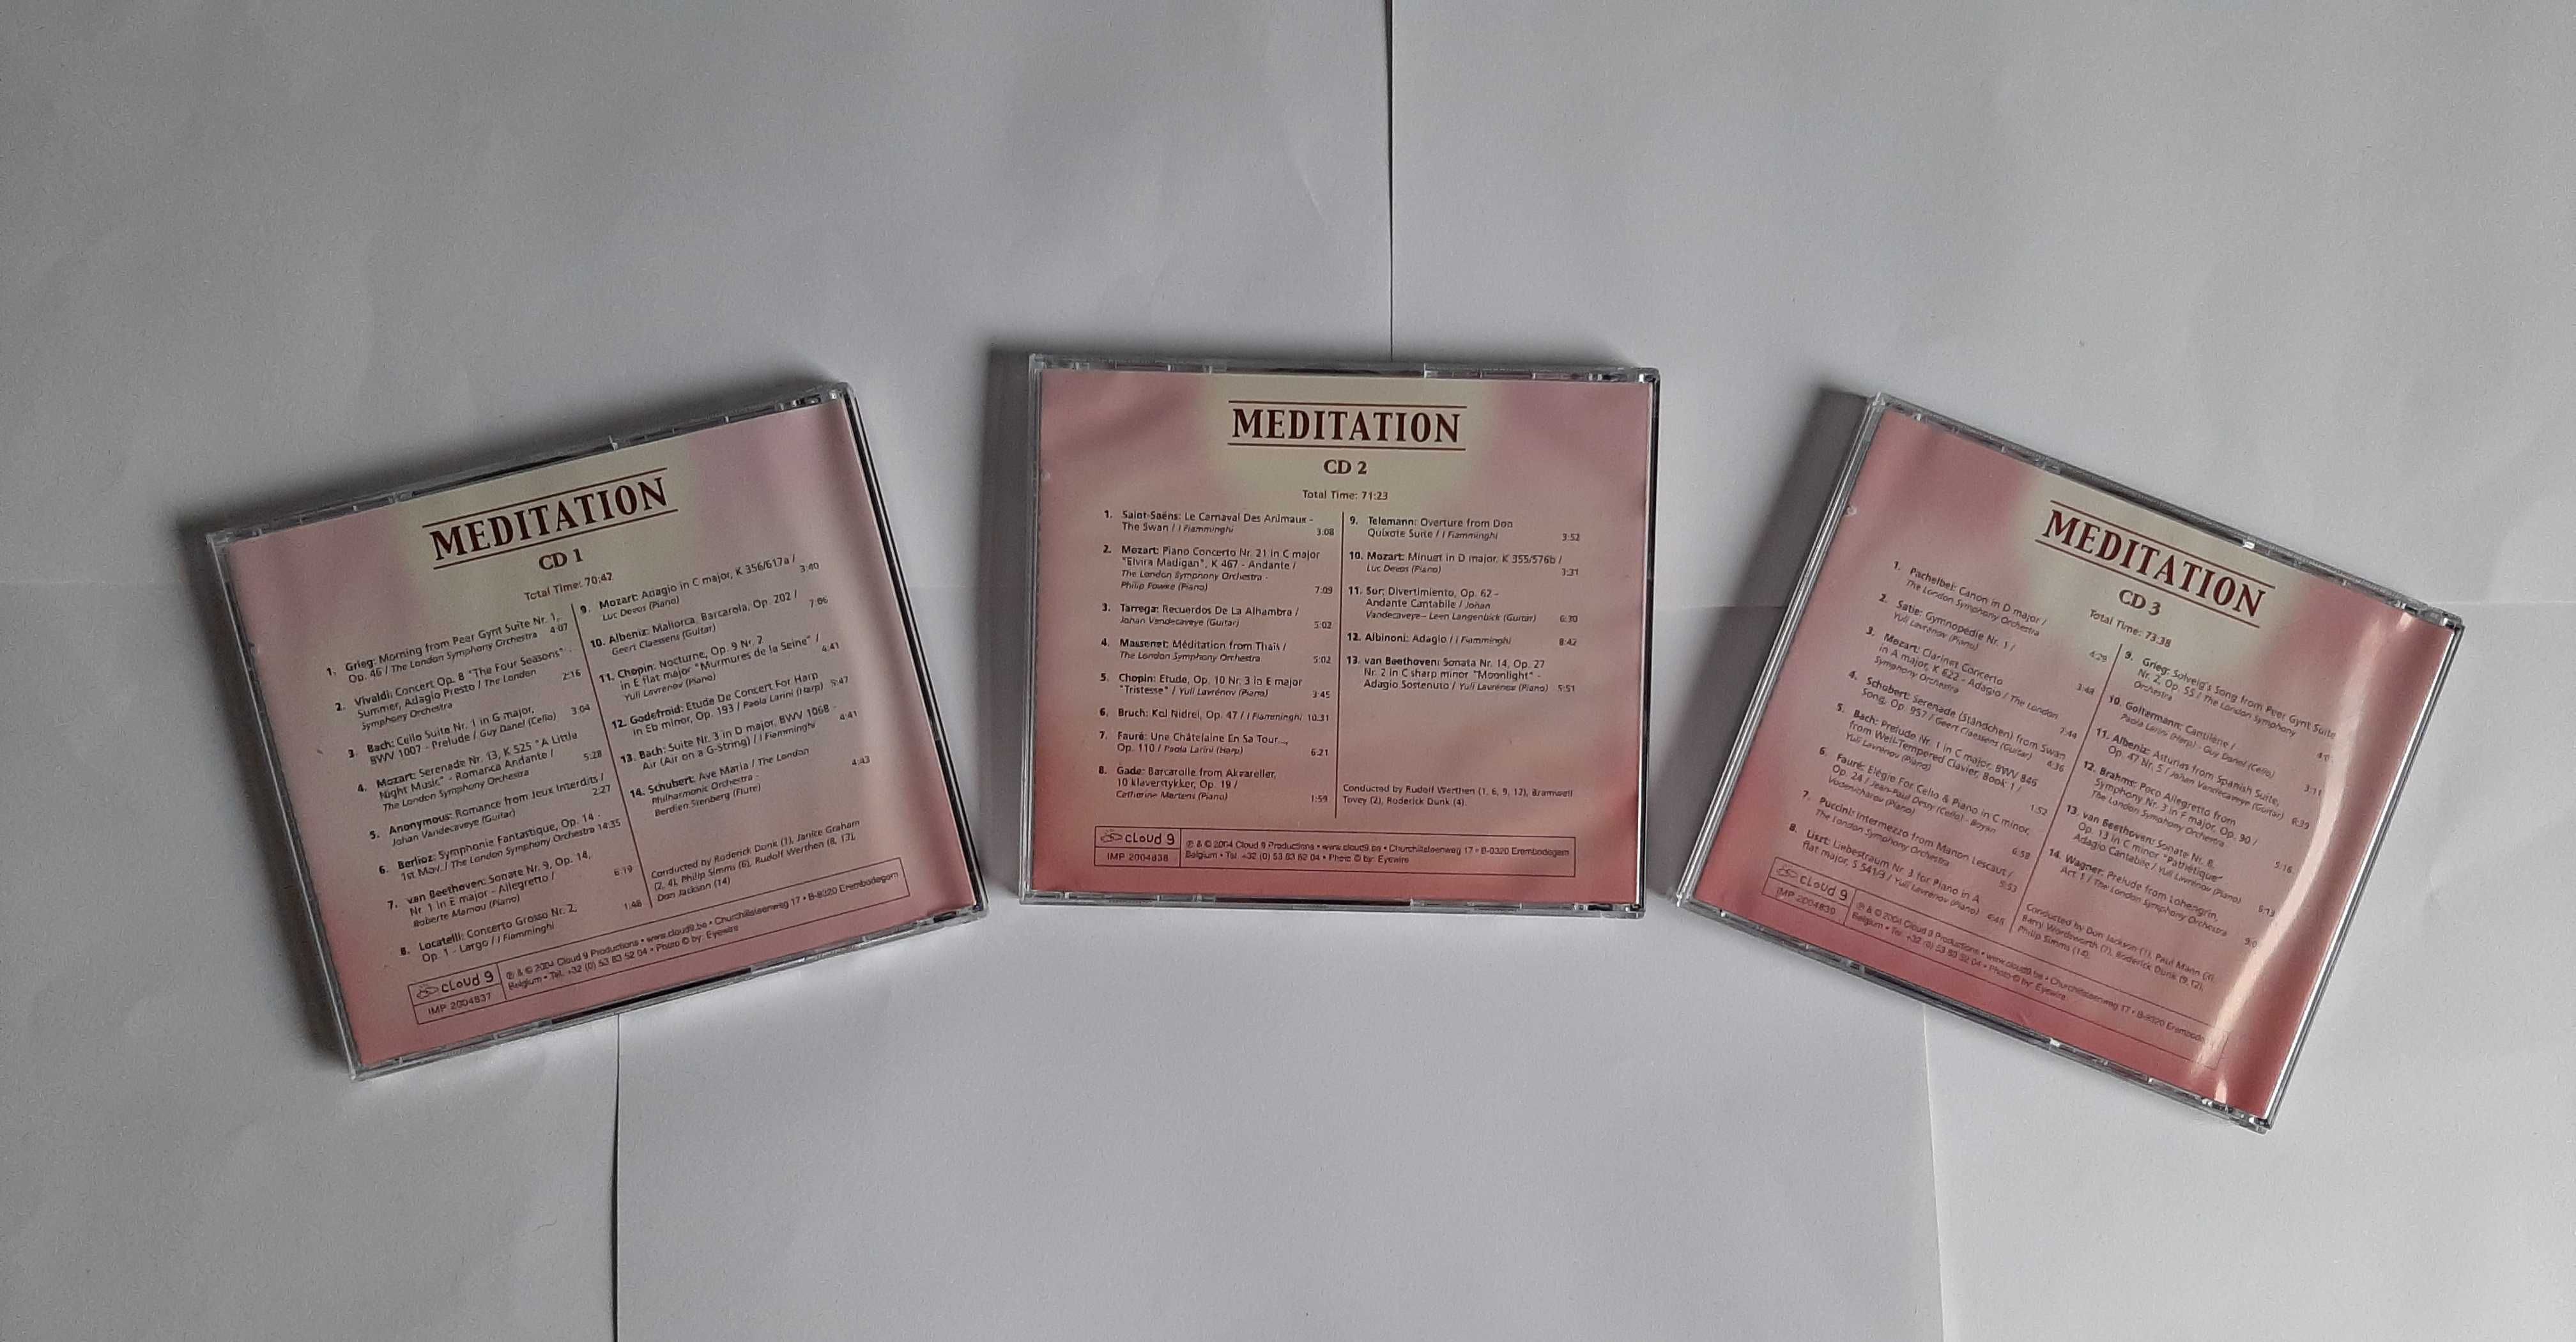 Meditation - Classical Moments For Relaxation 3 CD